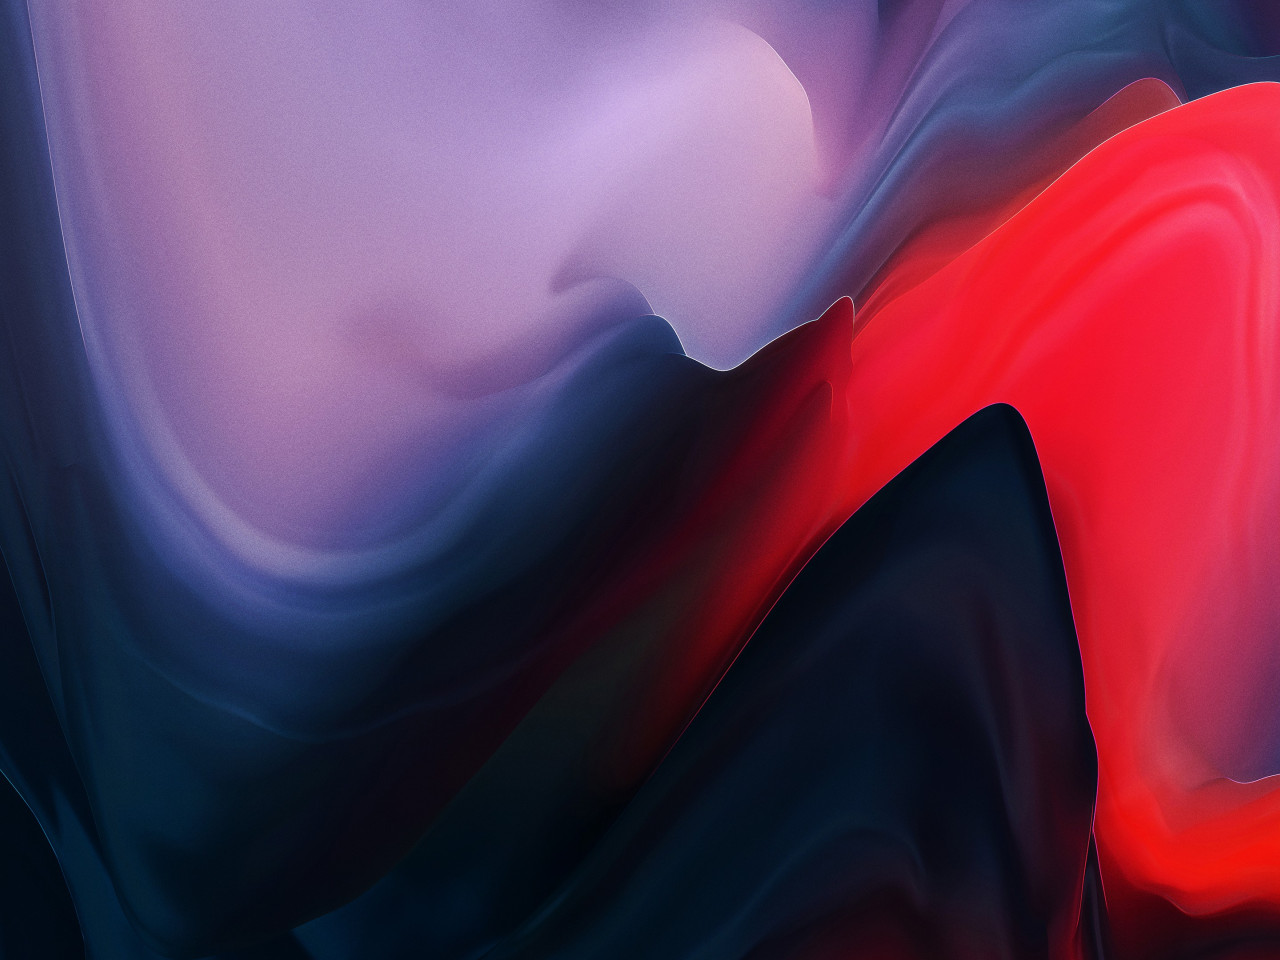 The Abstract from OnePlus 6T wallpaper 1280x960